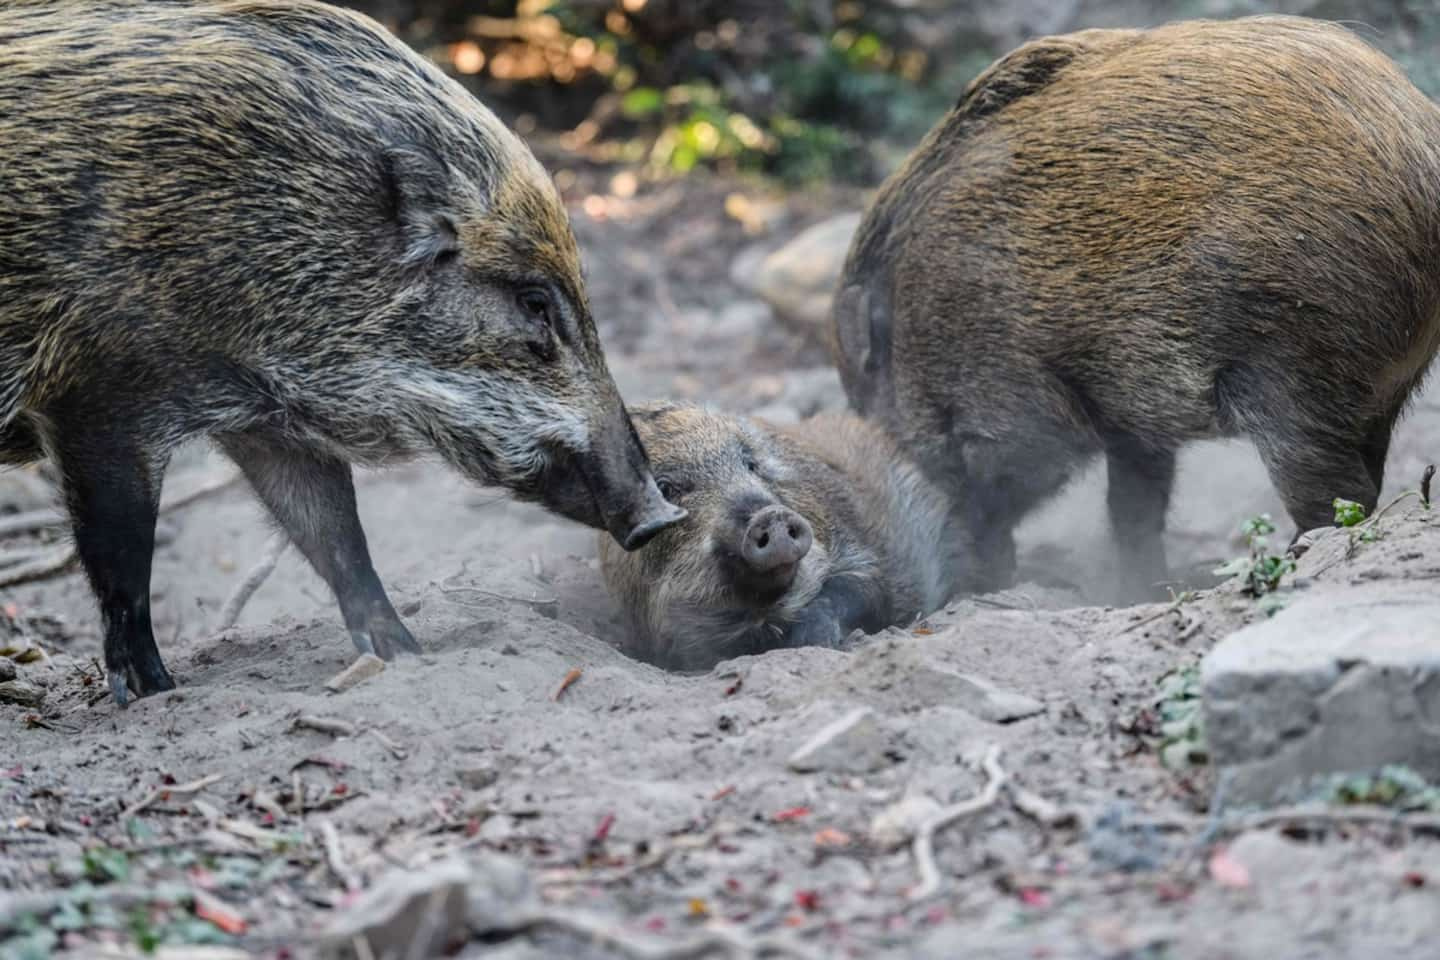 Pigs attack holidaymakers and devour their dog